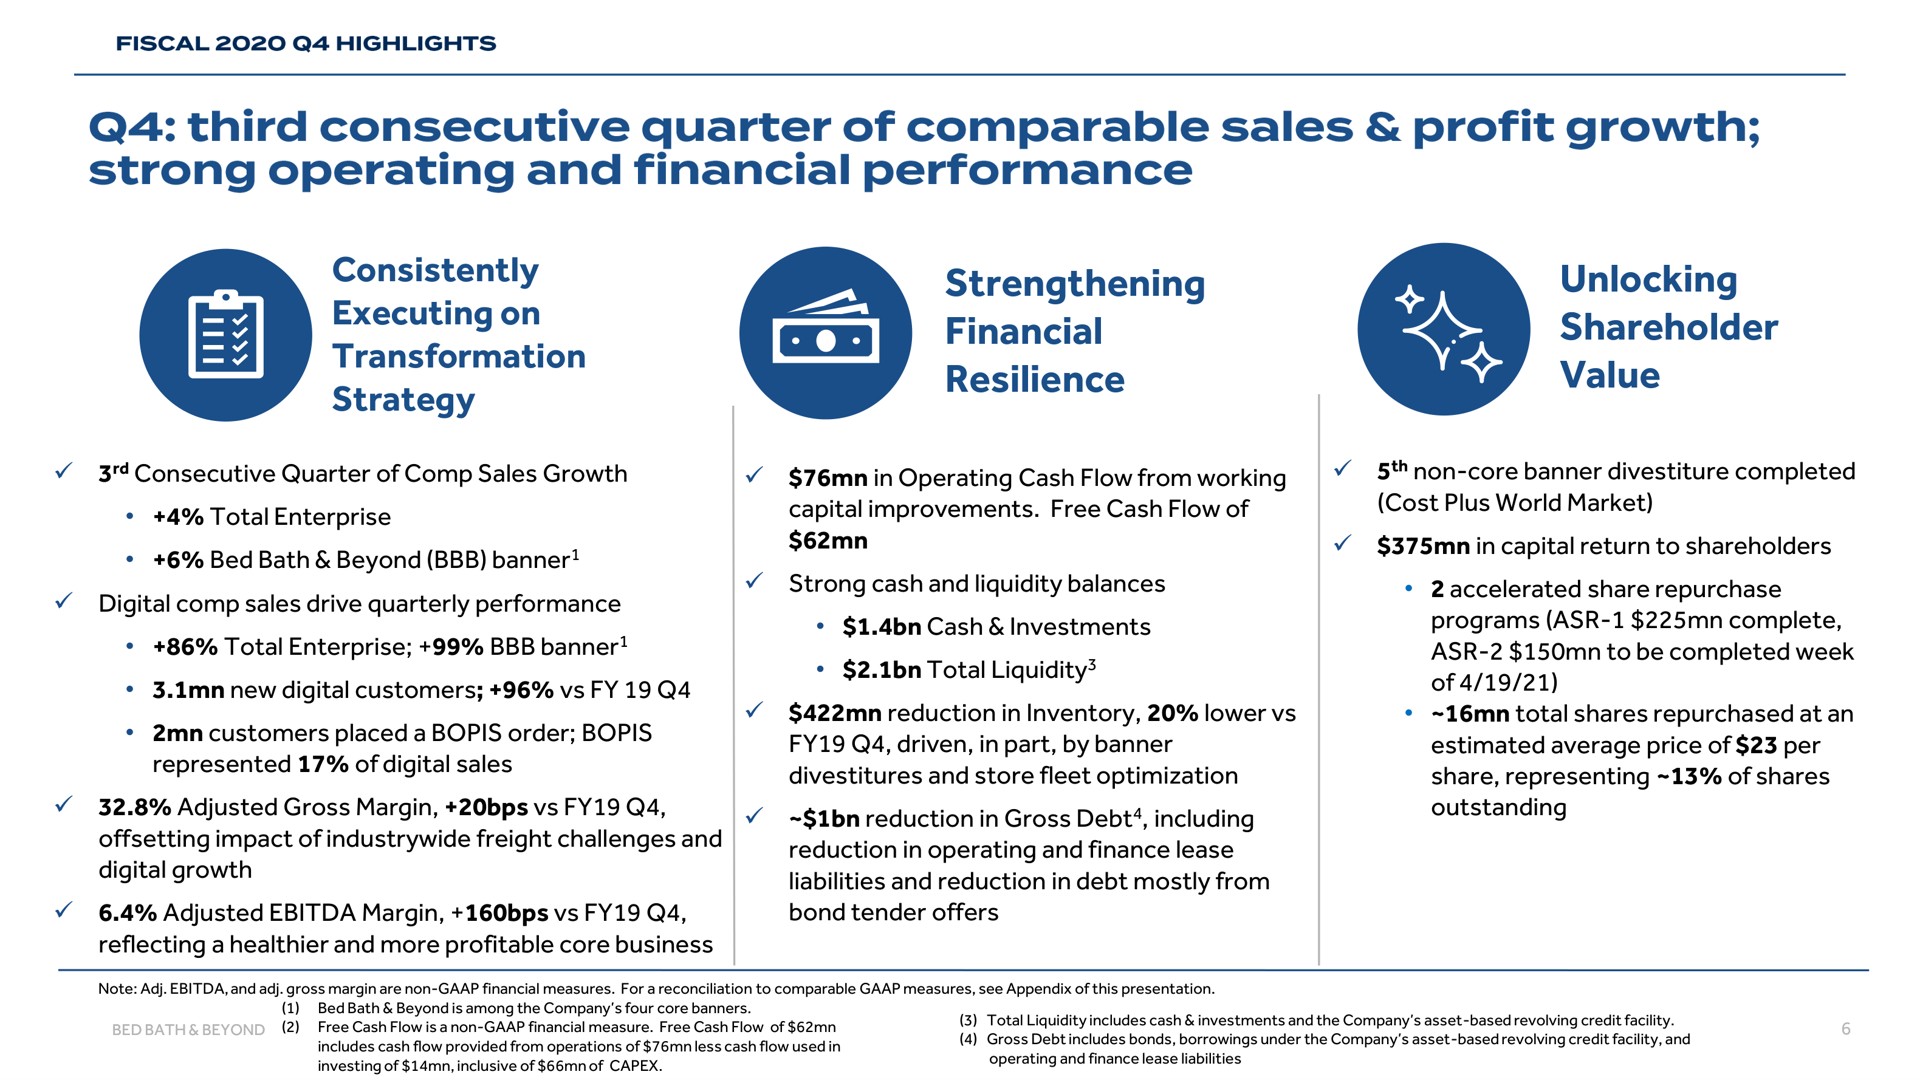 consistently executing on transformation strategy strengthening financial resilience unlocking shareholder value third consecutive quarter of comparable sales profit growth strong operating and performance | Bed Bath & Beyond